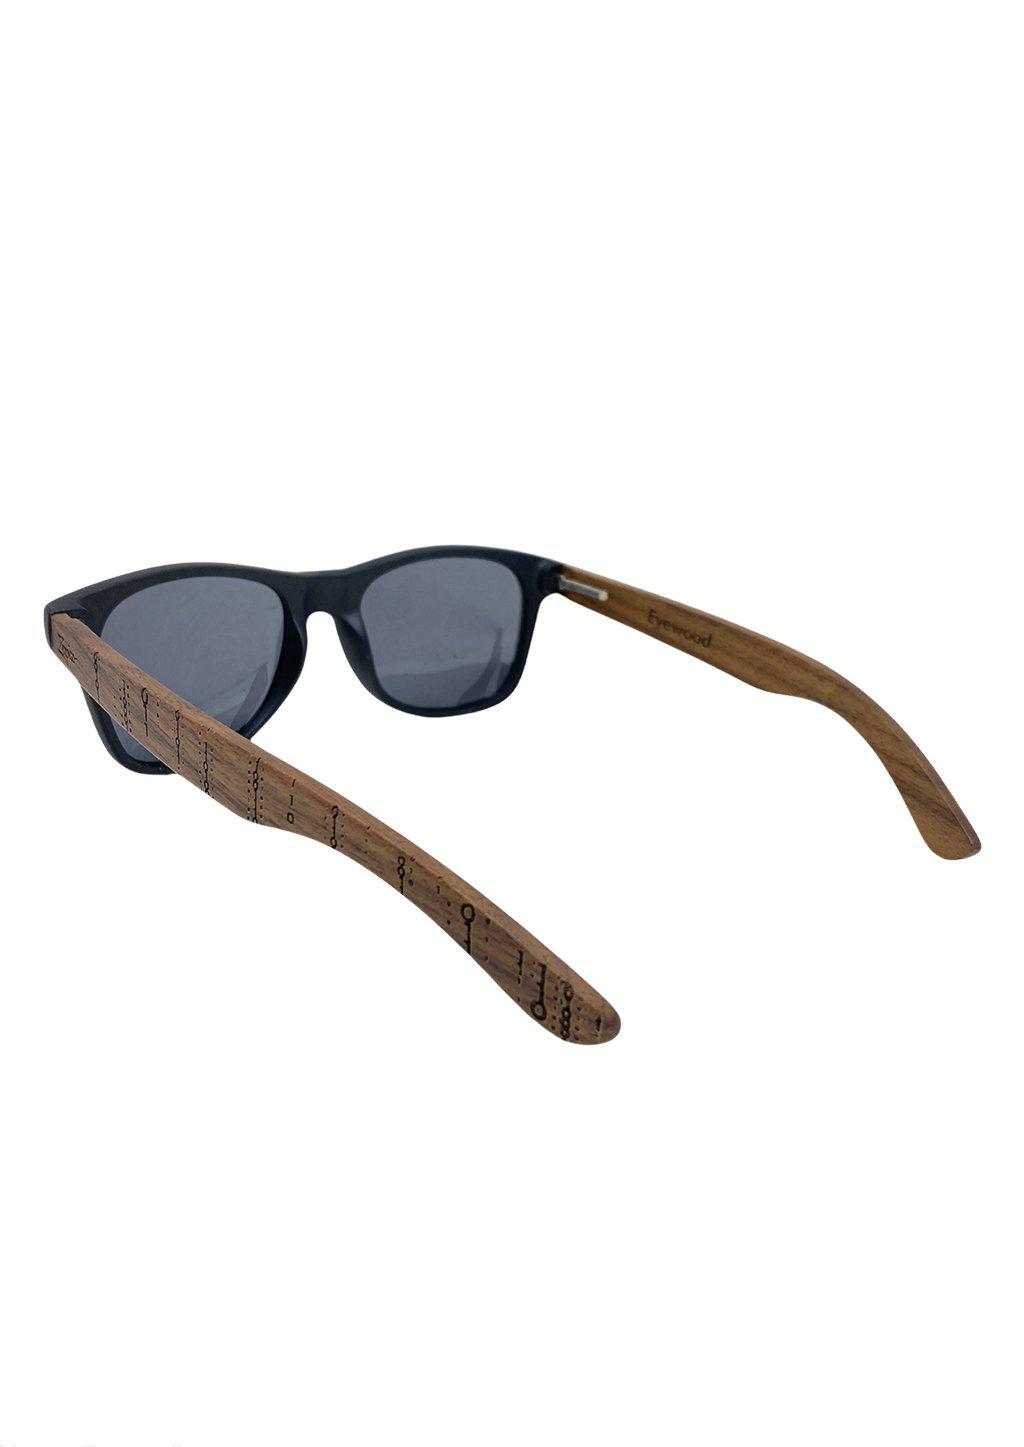 Engraved wooden sunglasses Inspired by the computers and the programing languages. Studio photo from the back.